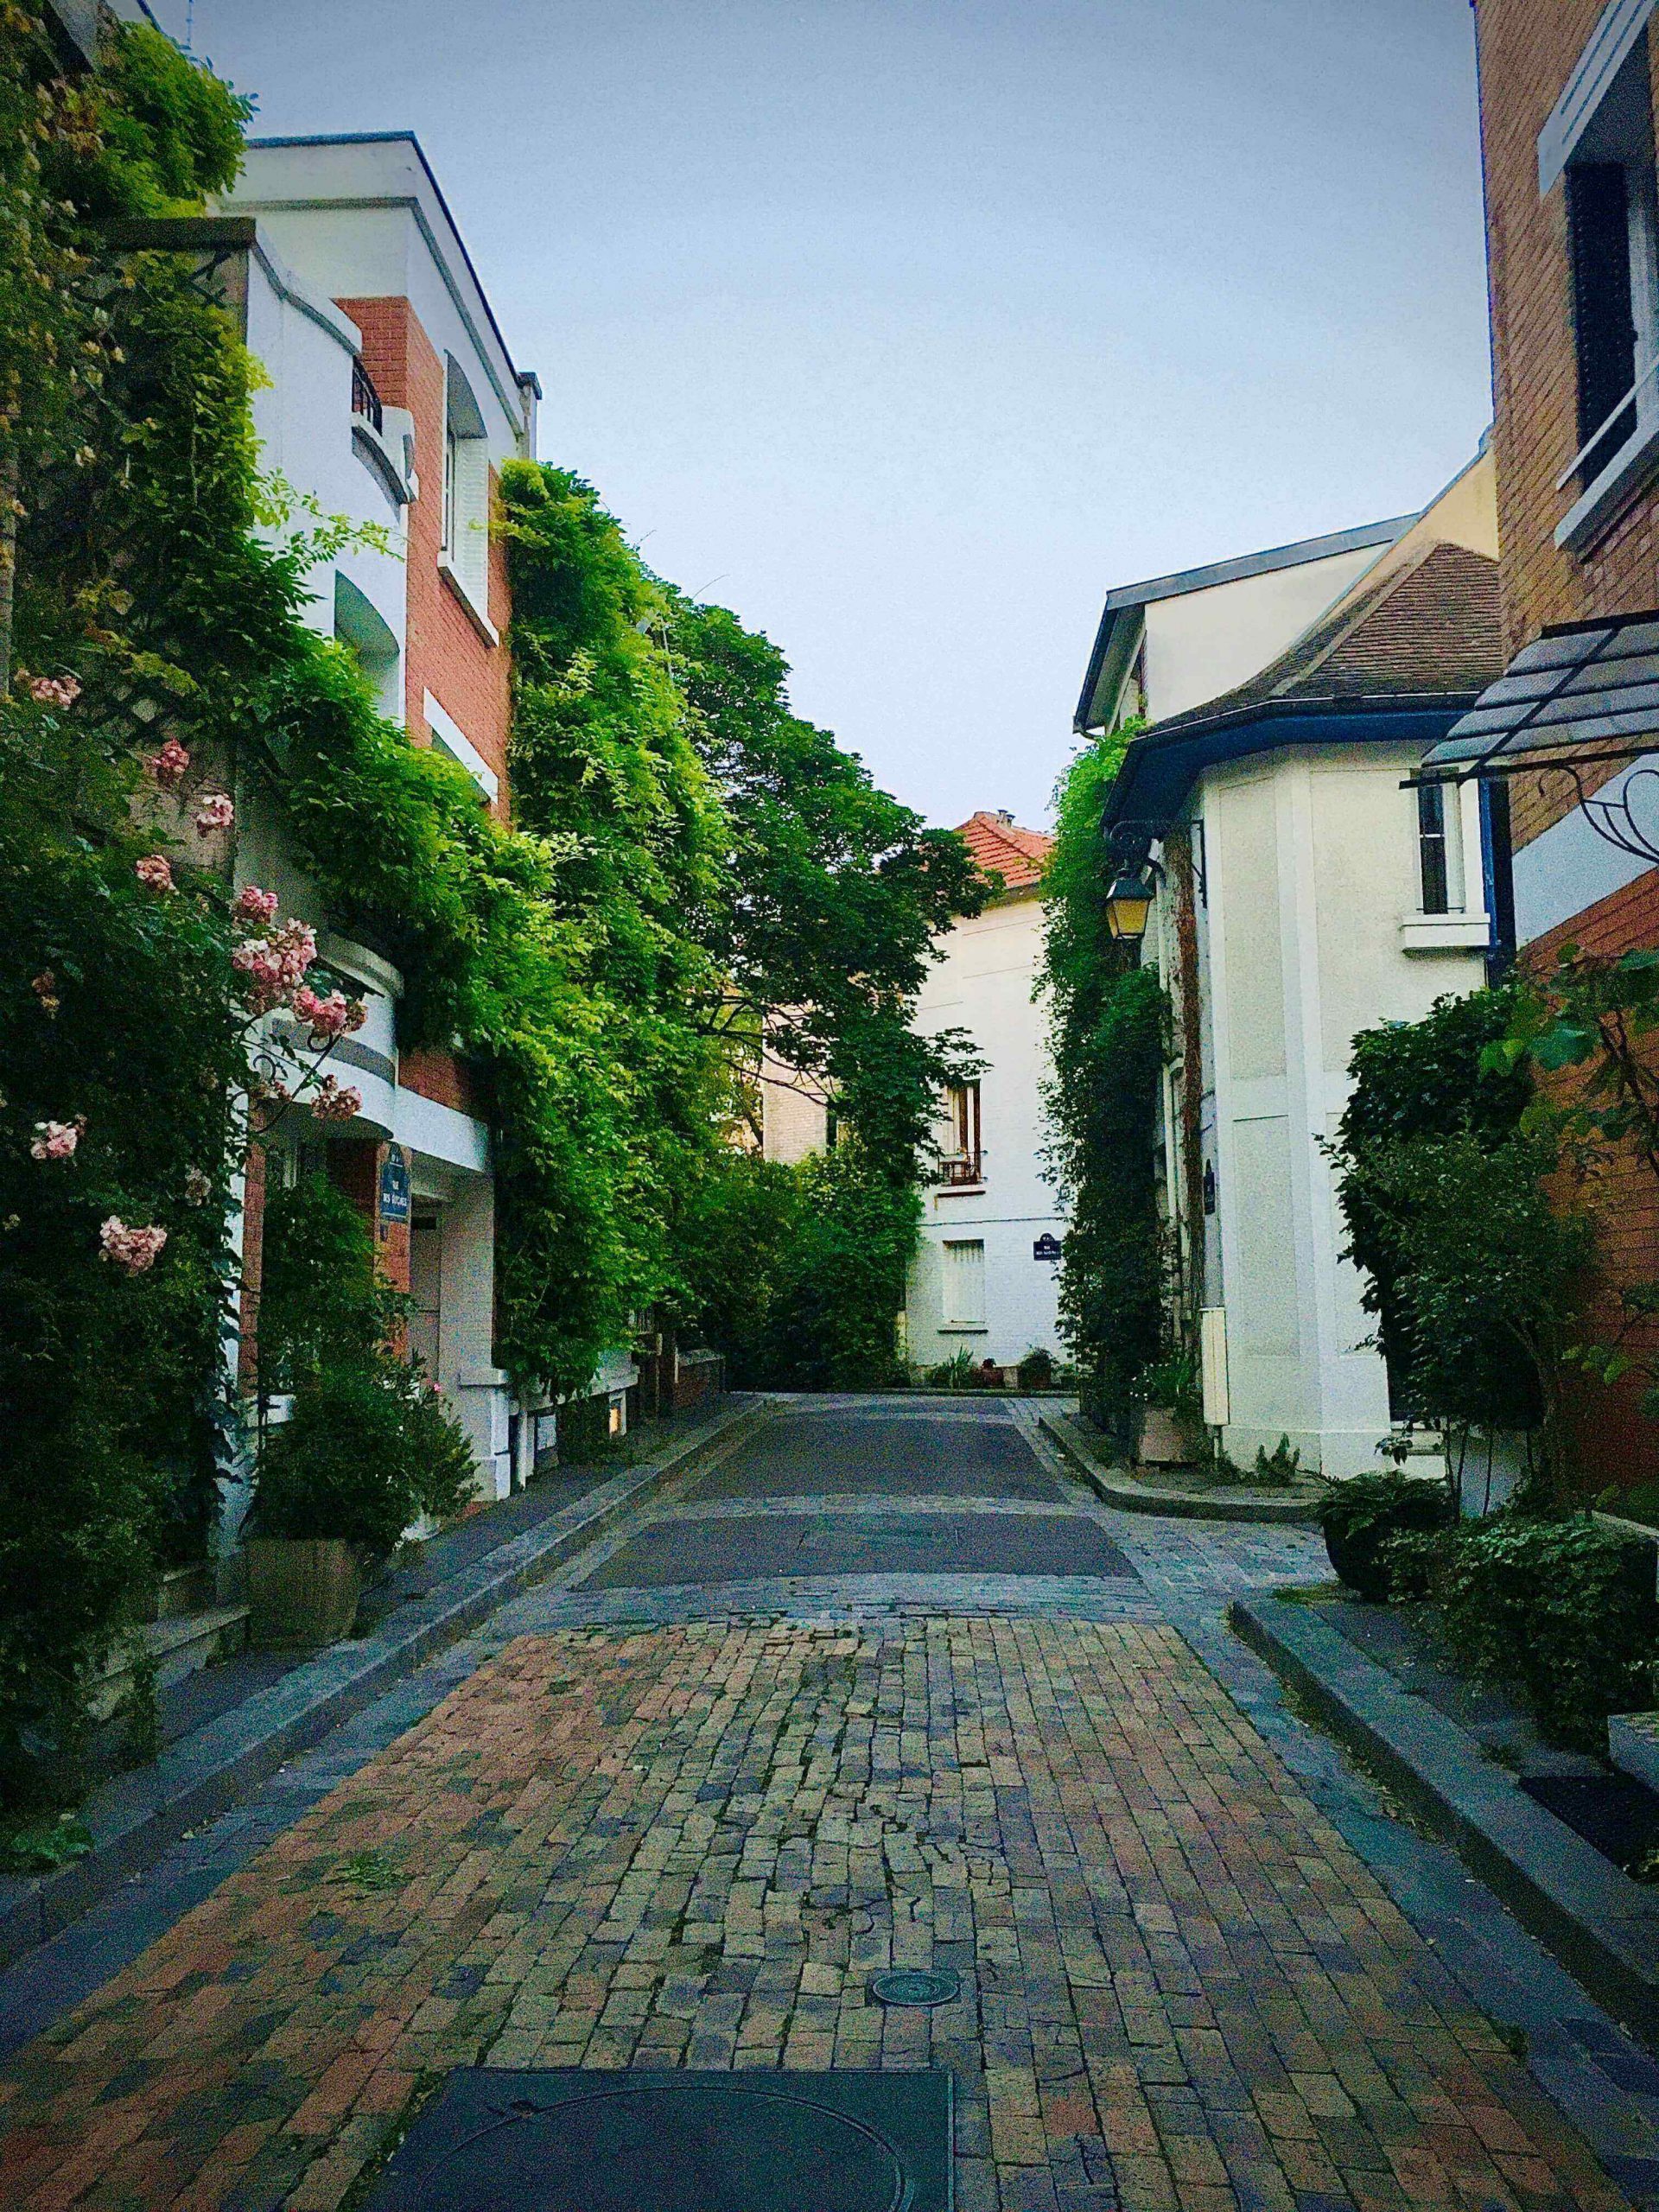 Cobblestone street lined with houses that have vines growing up the walls